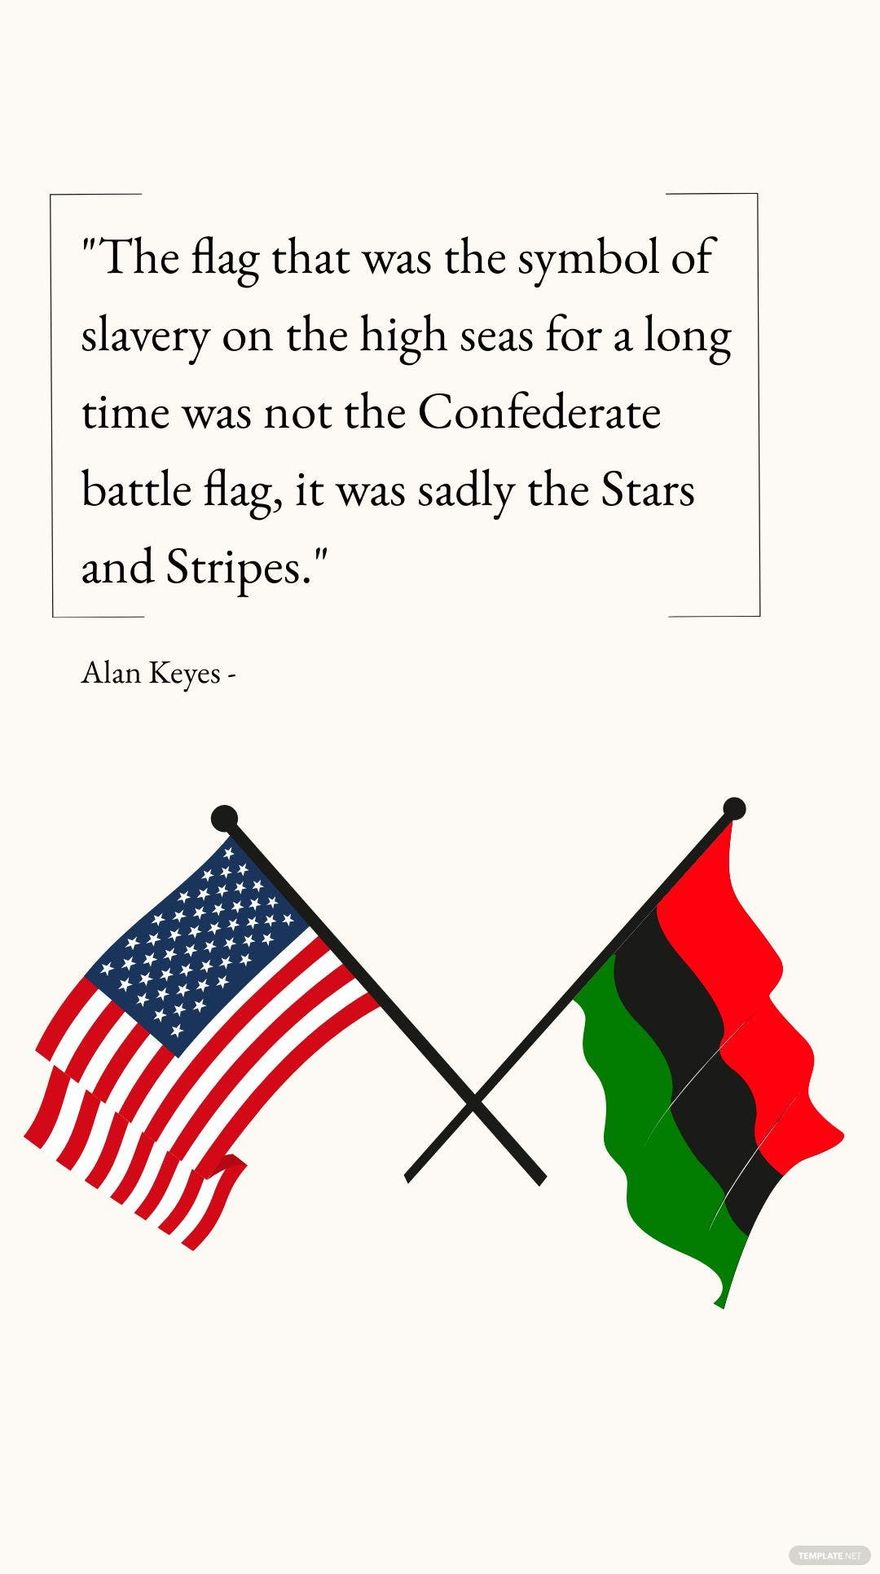 Free Alan Keyes - The flag that was the symbol of slavery on the high seas for a long time was not the Confederate battle flag, it was sadly the Stars and Stripes. in JPG